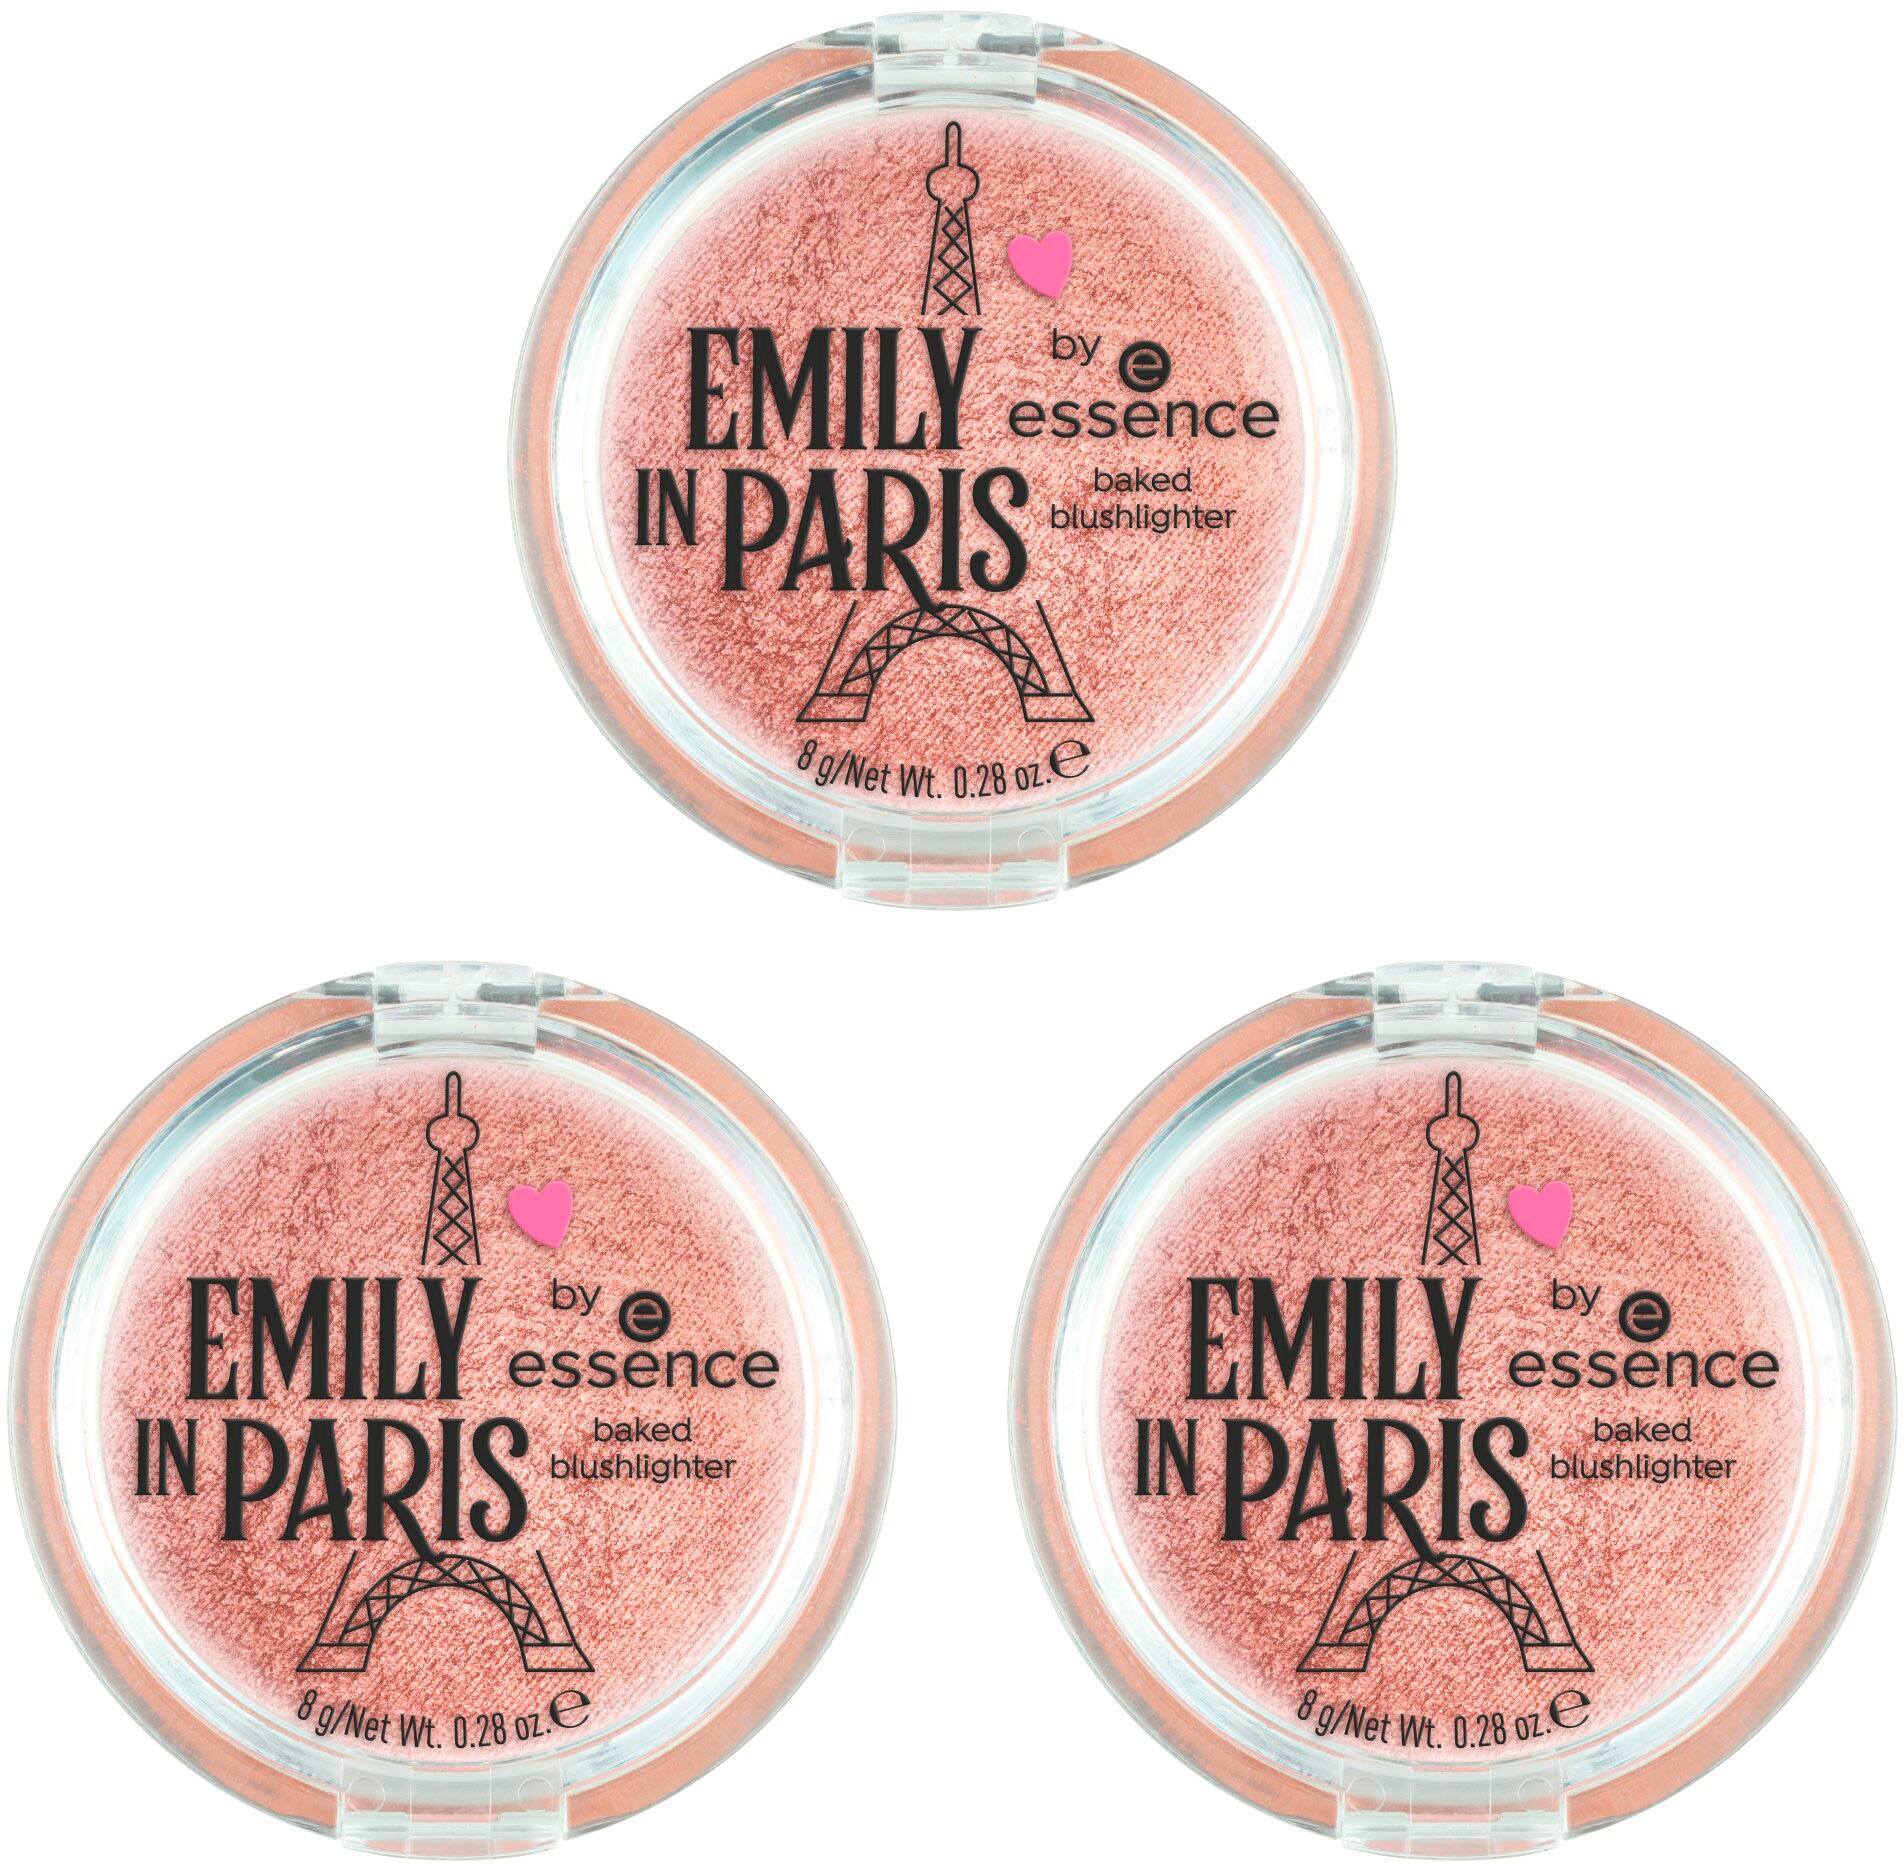 IN bei by PARIS essence Essence Rouge blushlighter« »EMILY baked online